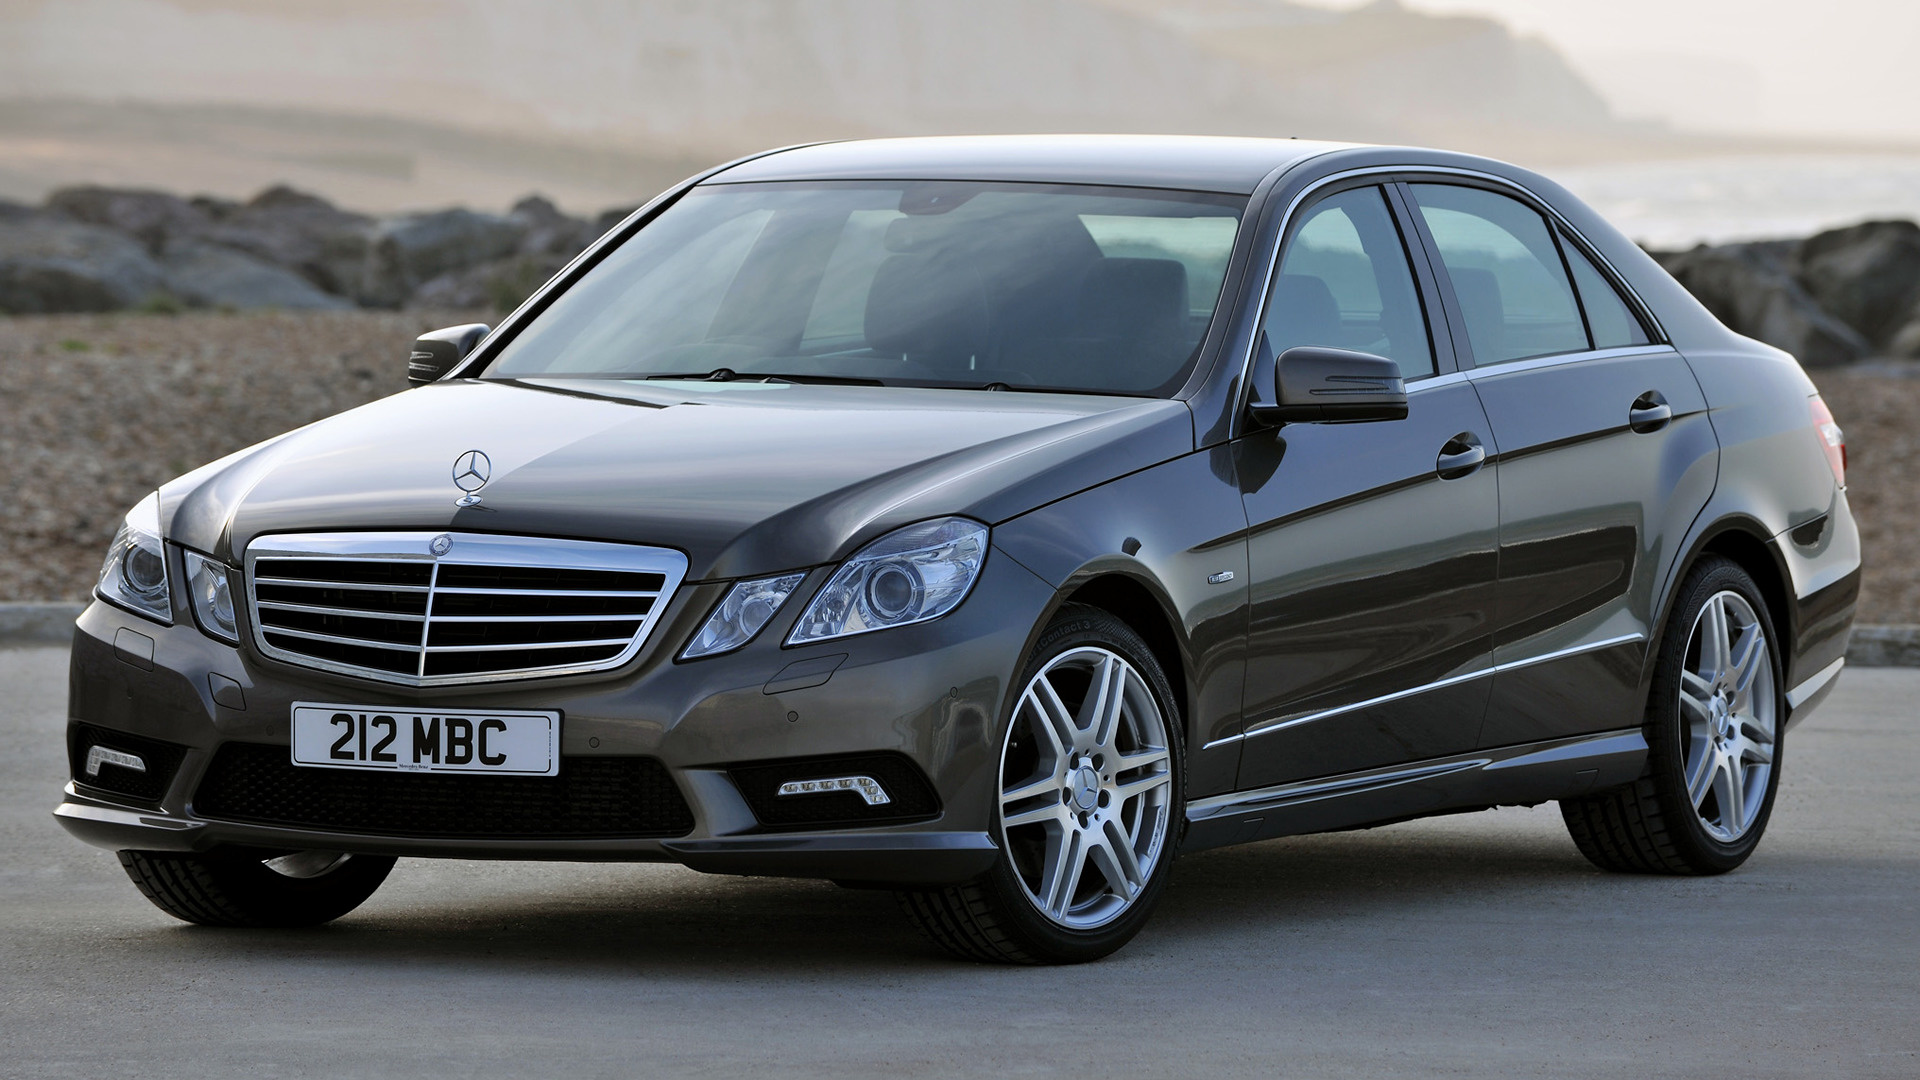 Mercedes Benz E 220 Cdi Amg Styling Ultrawide Wallpapers